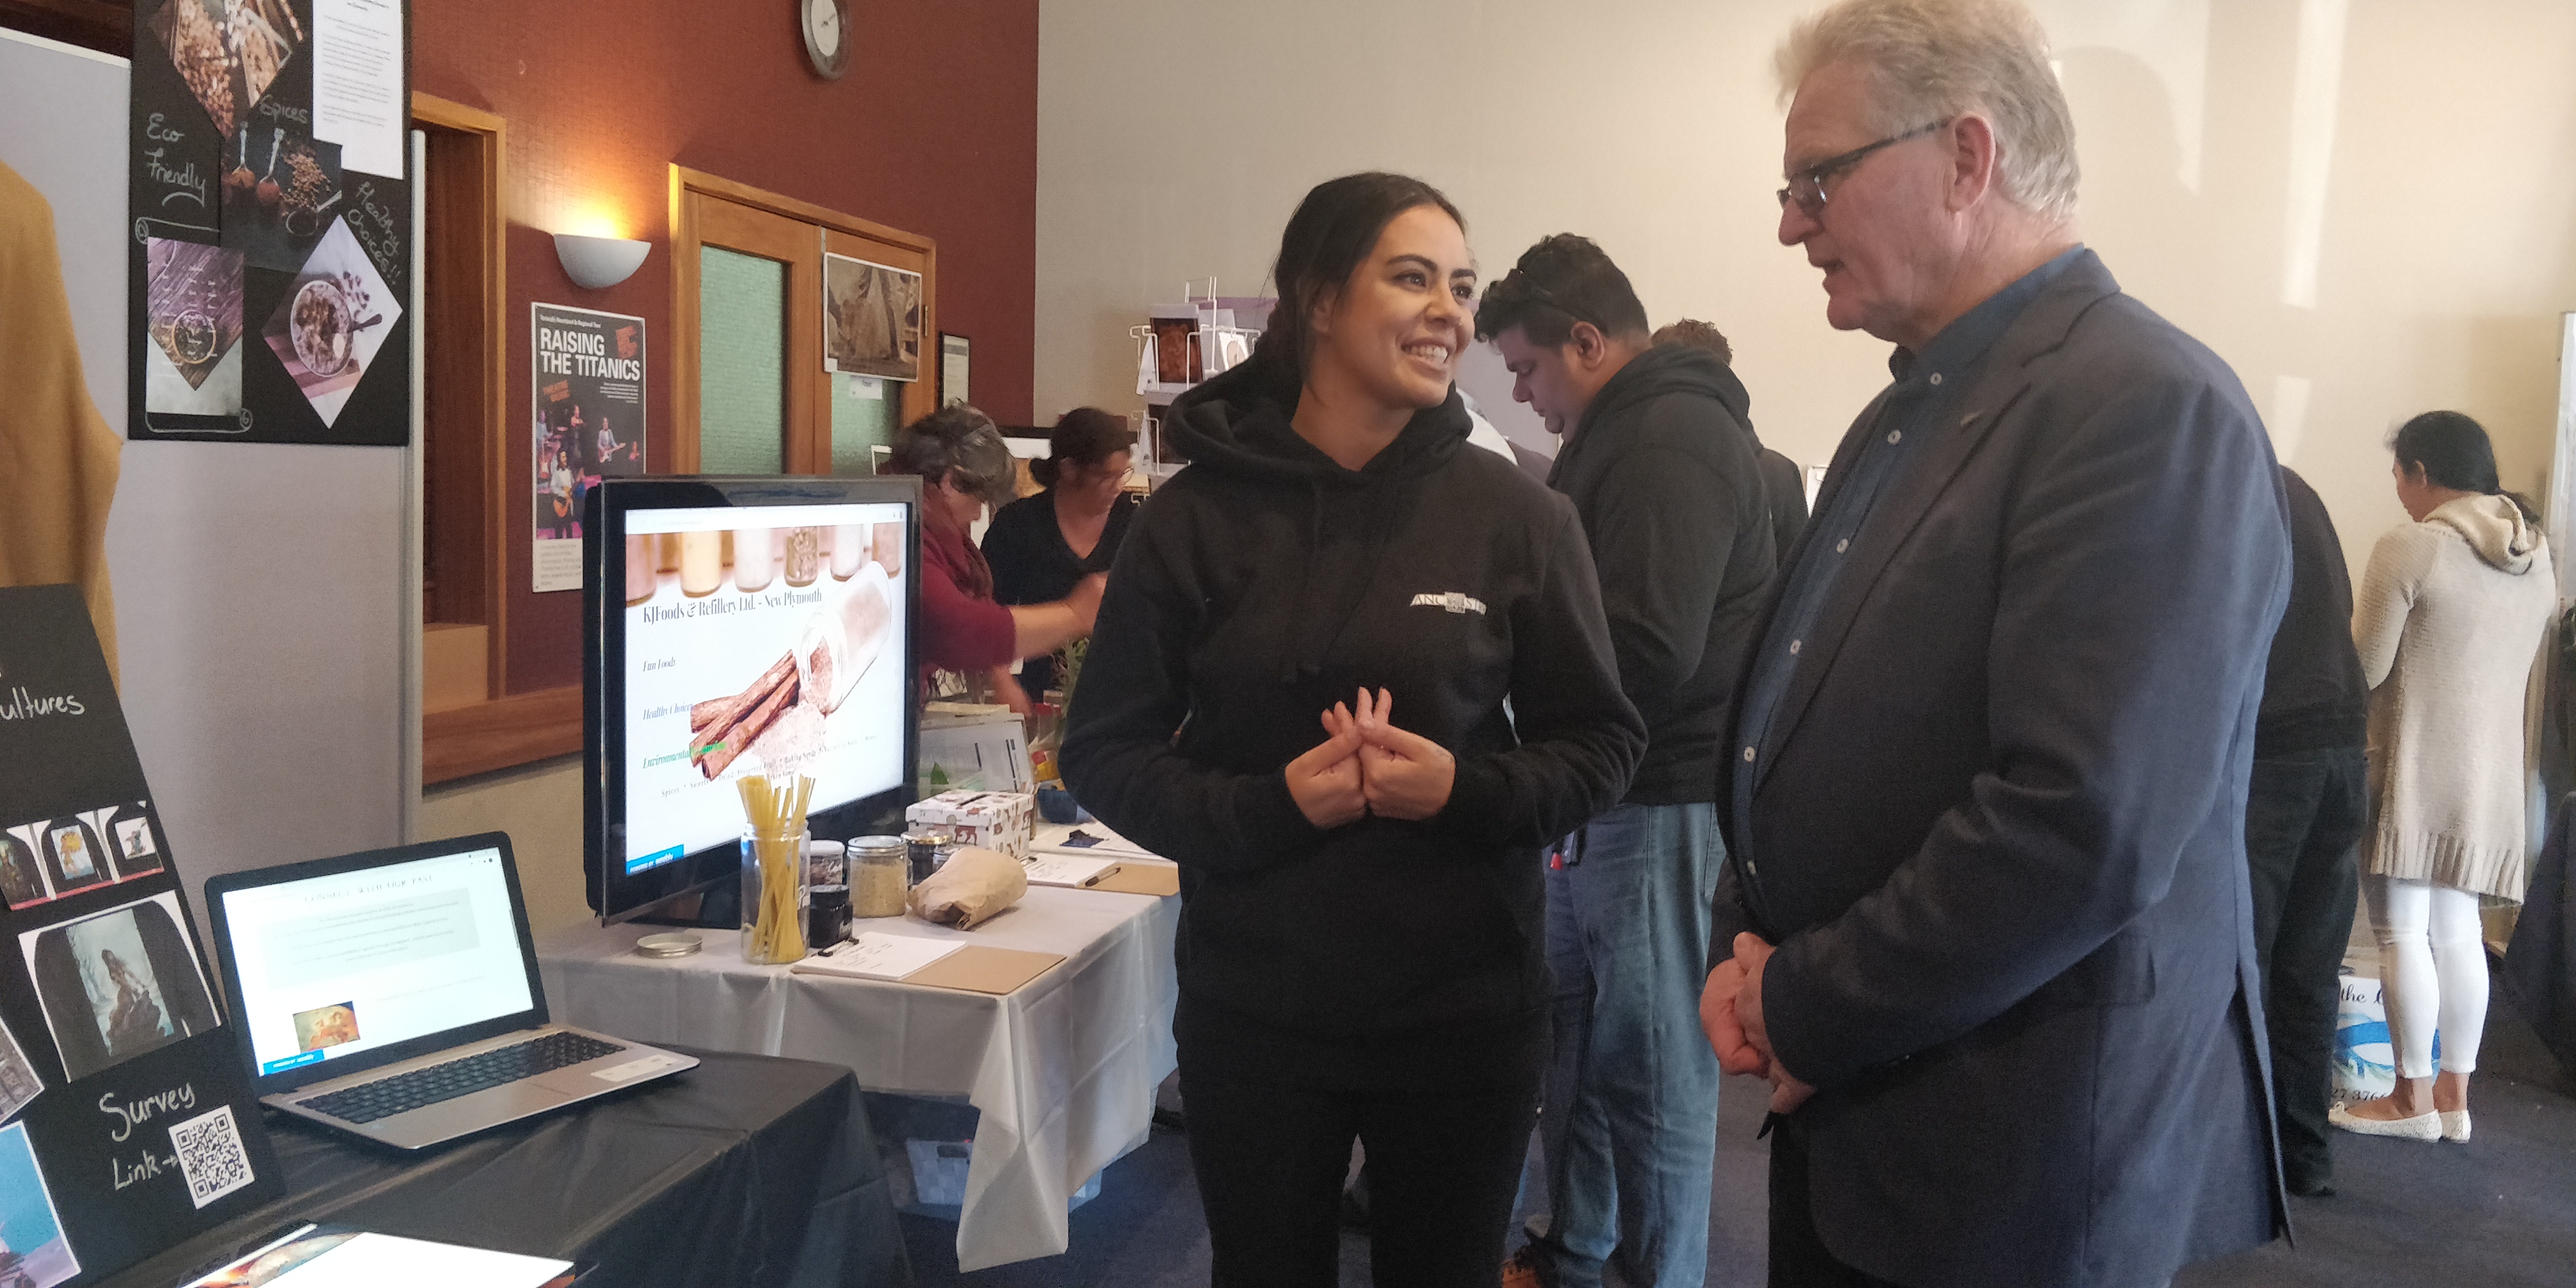 South Taranaki Mayor Phil Nixon talks to Janelle Ferries of the Rebel Business School at their business exhibition event.